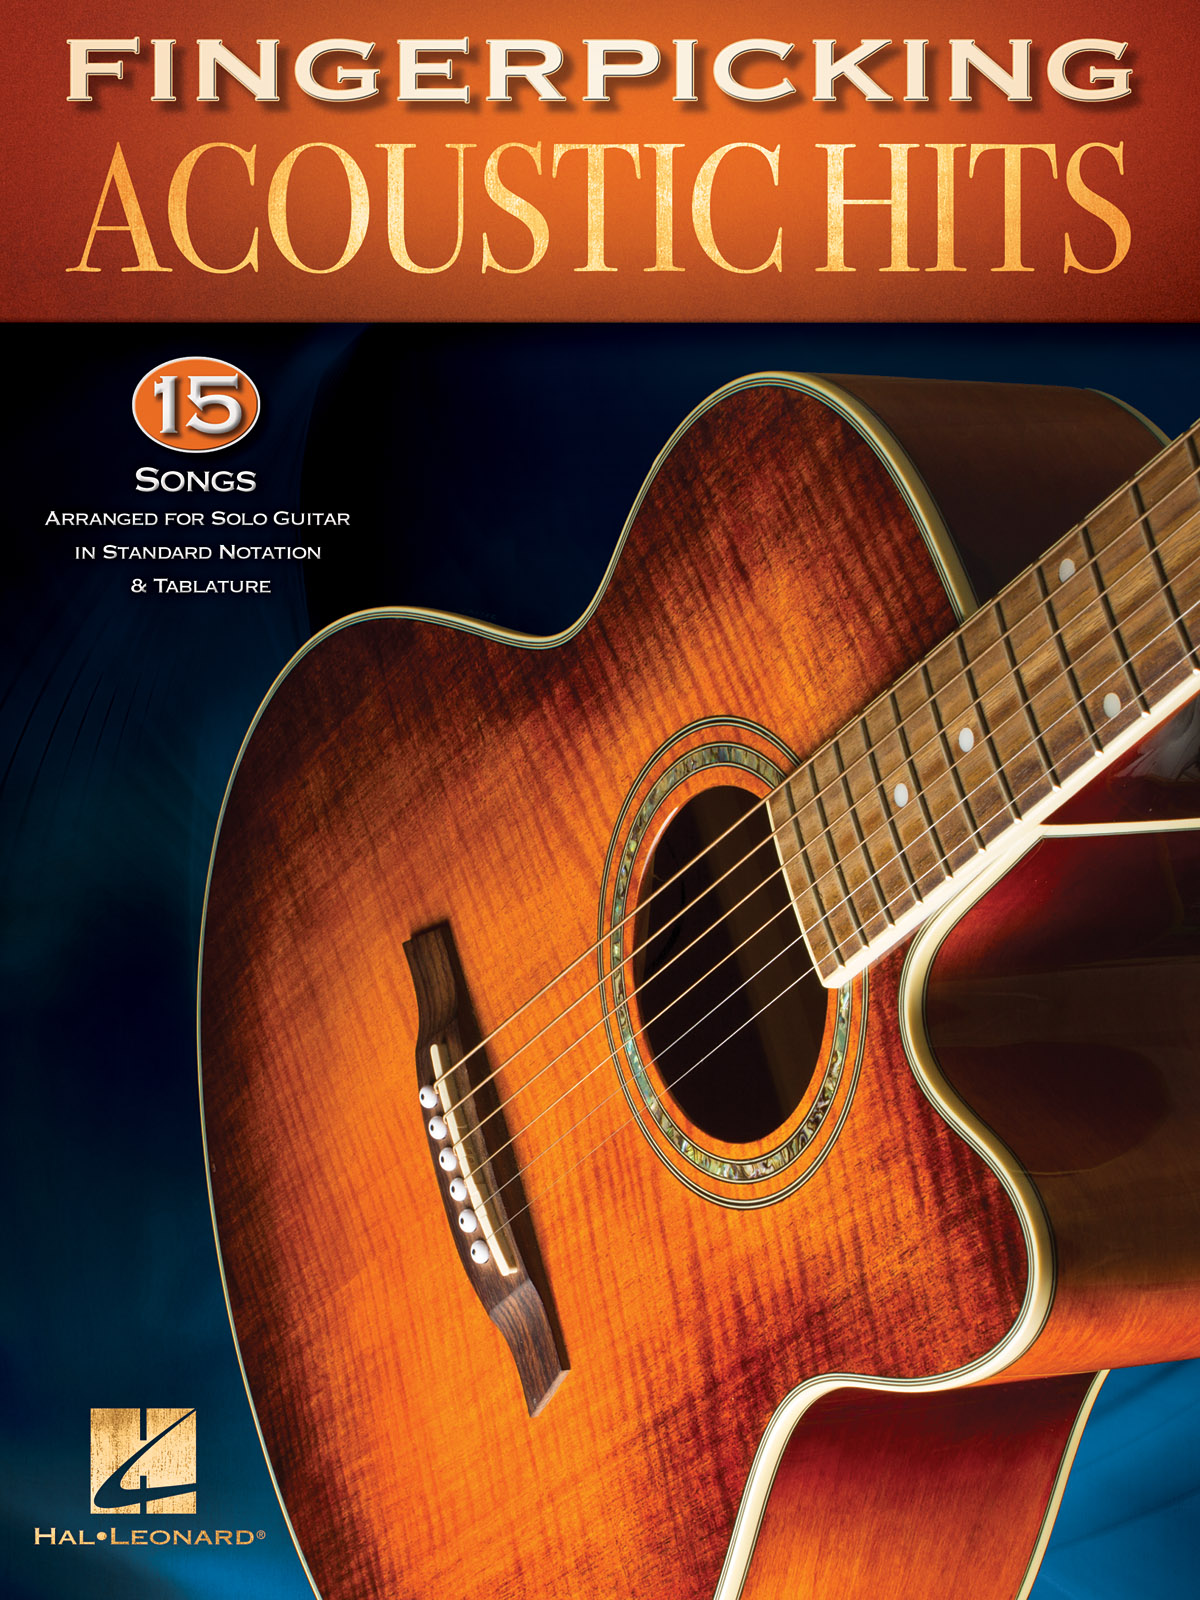 Fingerpicking Acoustic Hits - 15 Songs Arranged for Solo Guitar in Standard Notation & Tab noty na kytaru